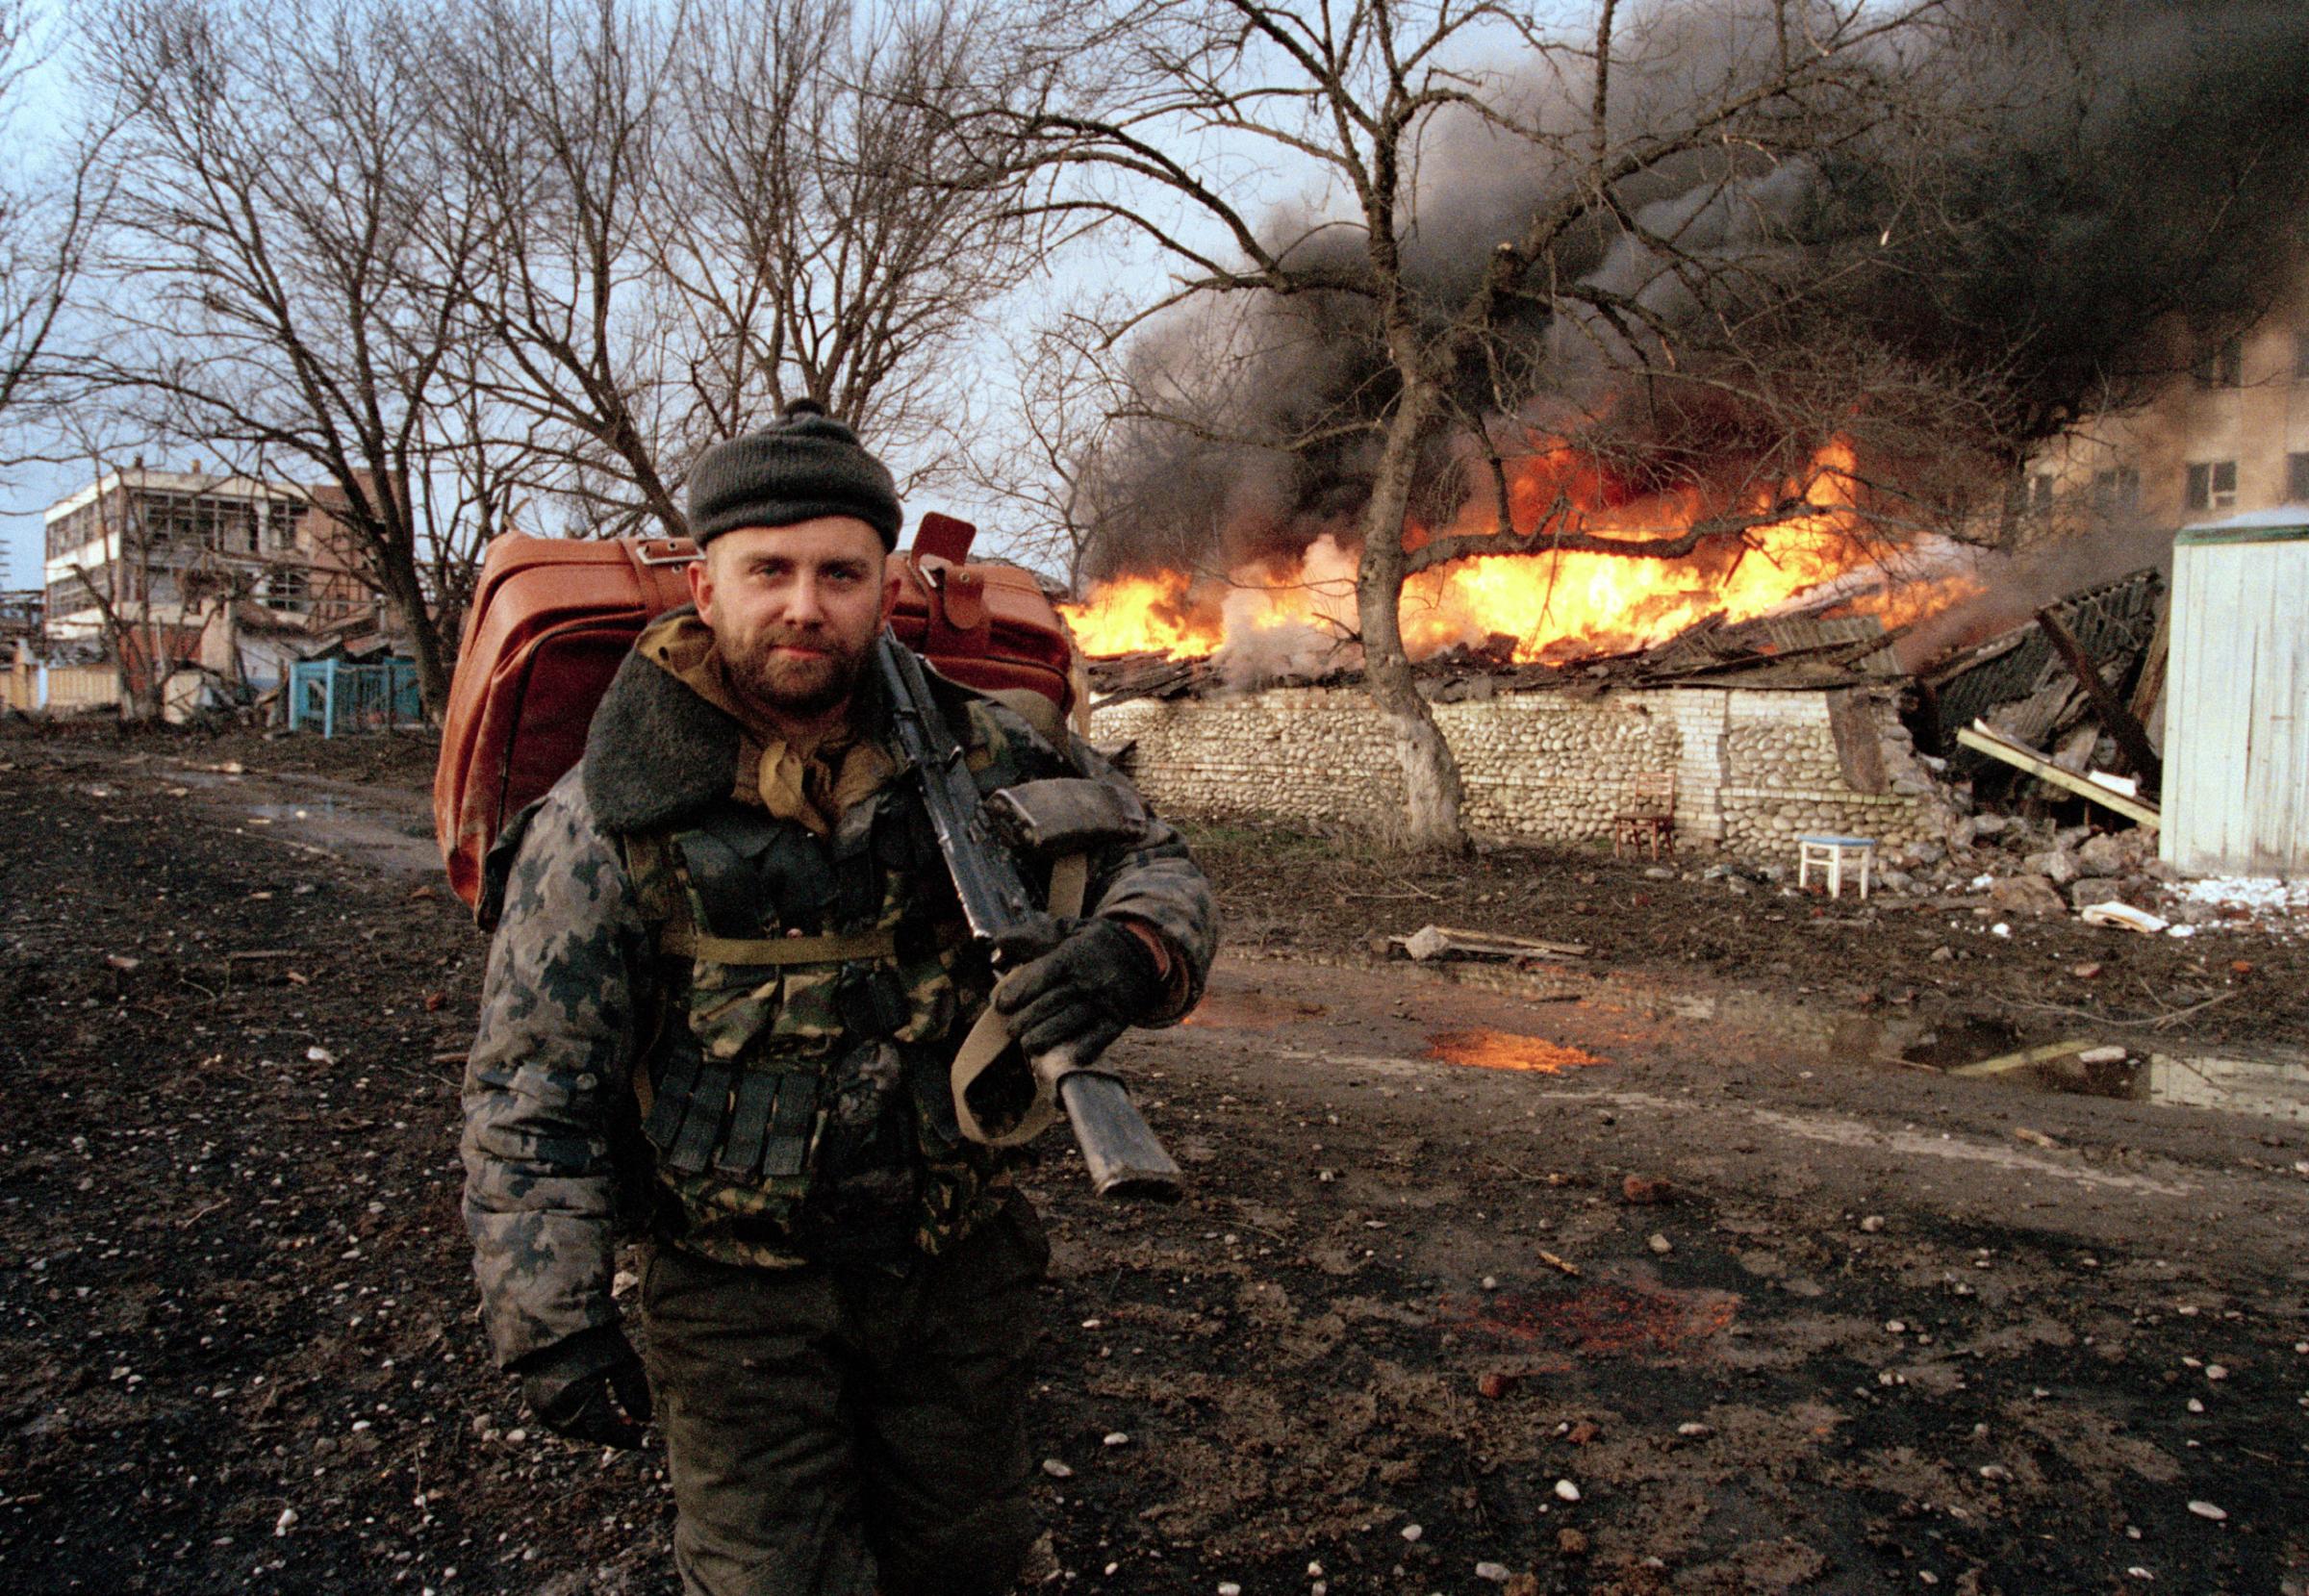 A Russian militia special forces soldier in Grozny, Chechnya, January 2000. Yuri kozyrev—NOOR